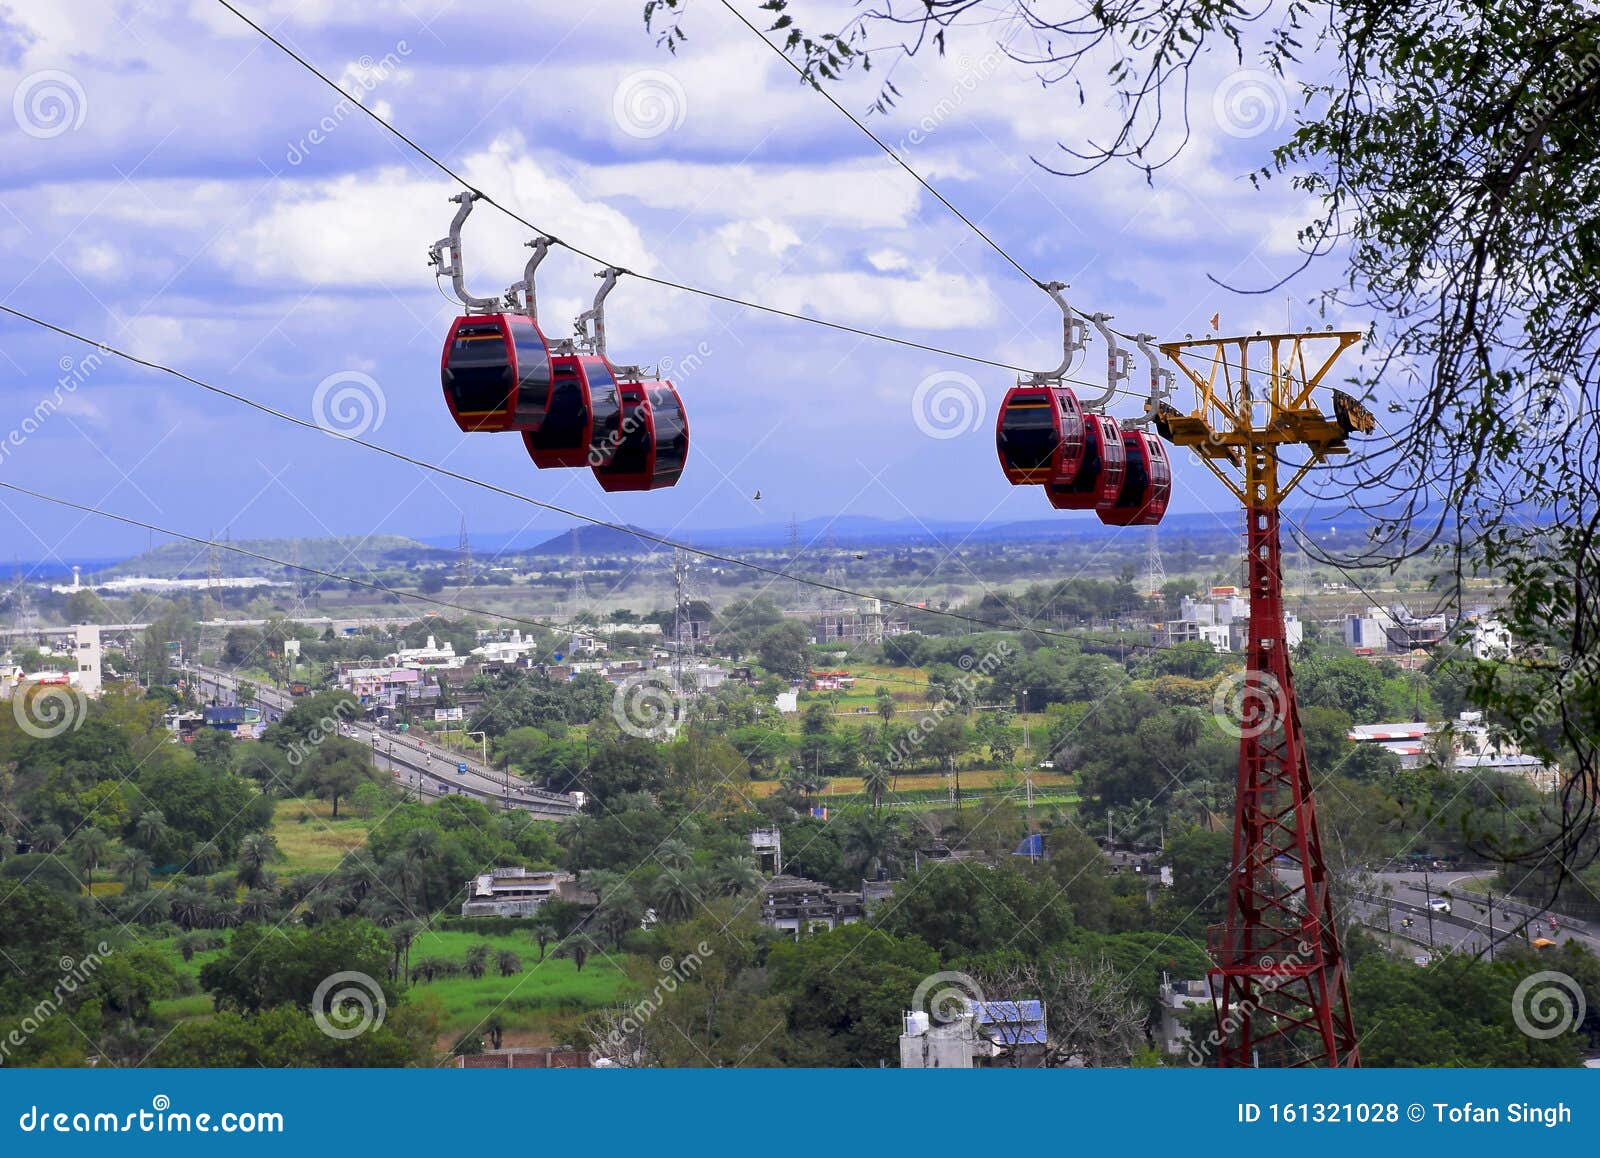 beautiful view of dewas city and rope-way cable car, taken from the temple of maa chamunda and maa tulja bhavani, situated on the